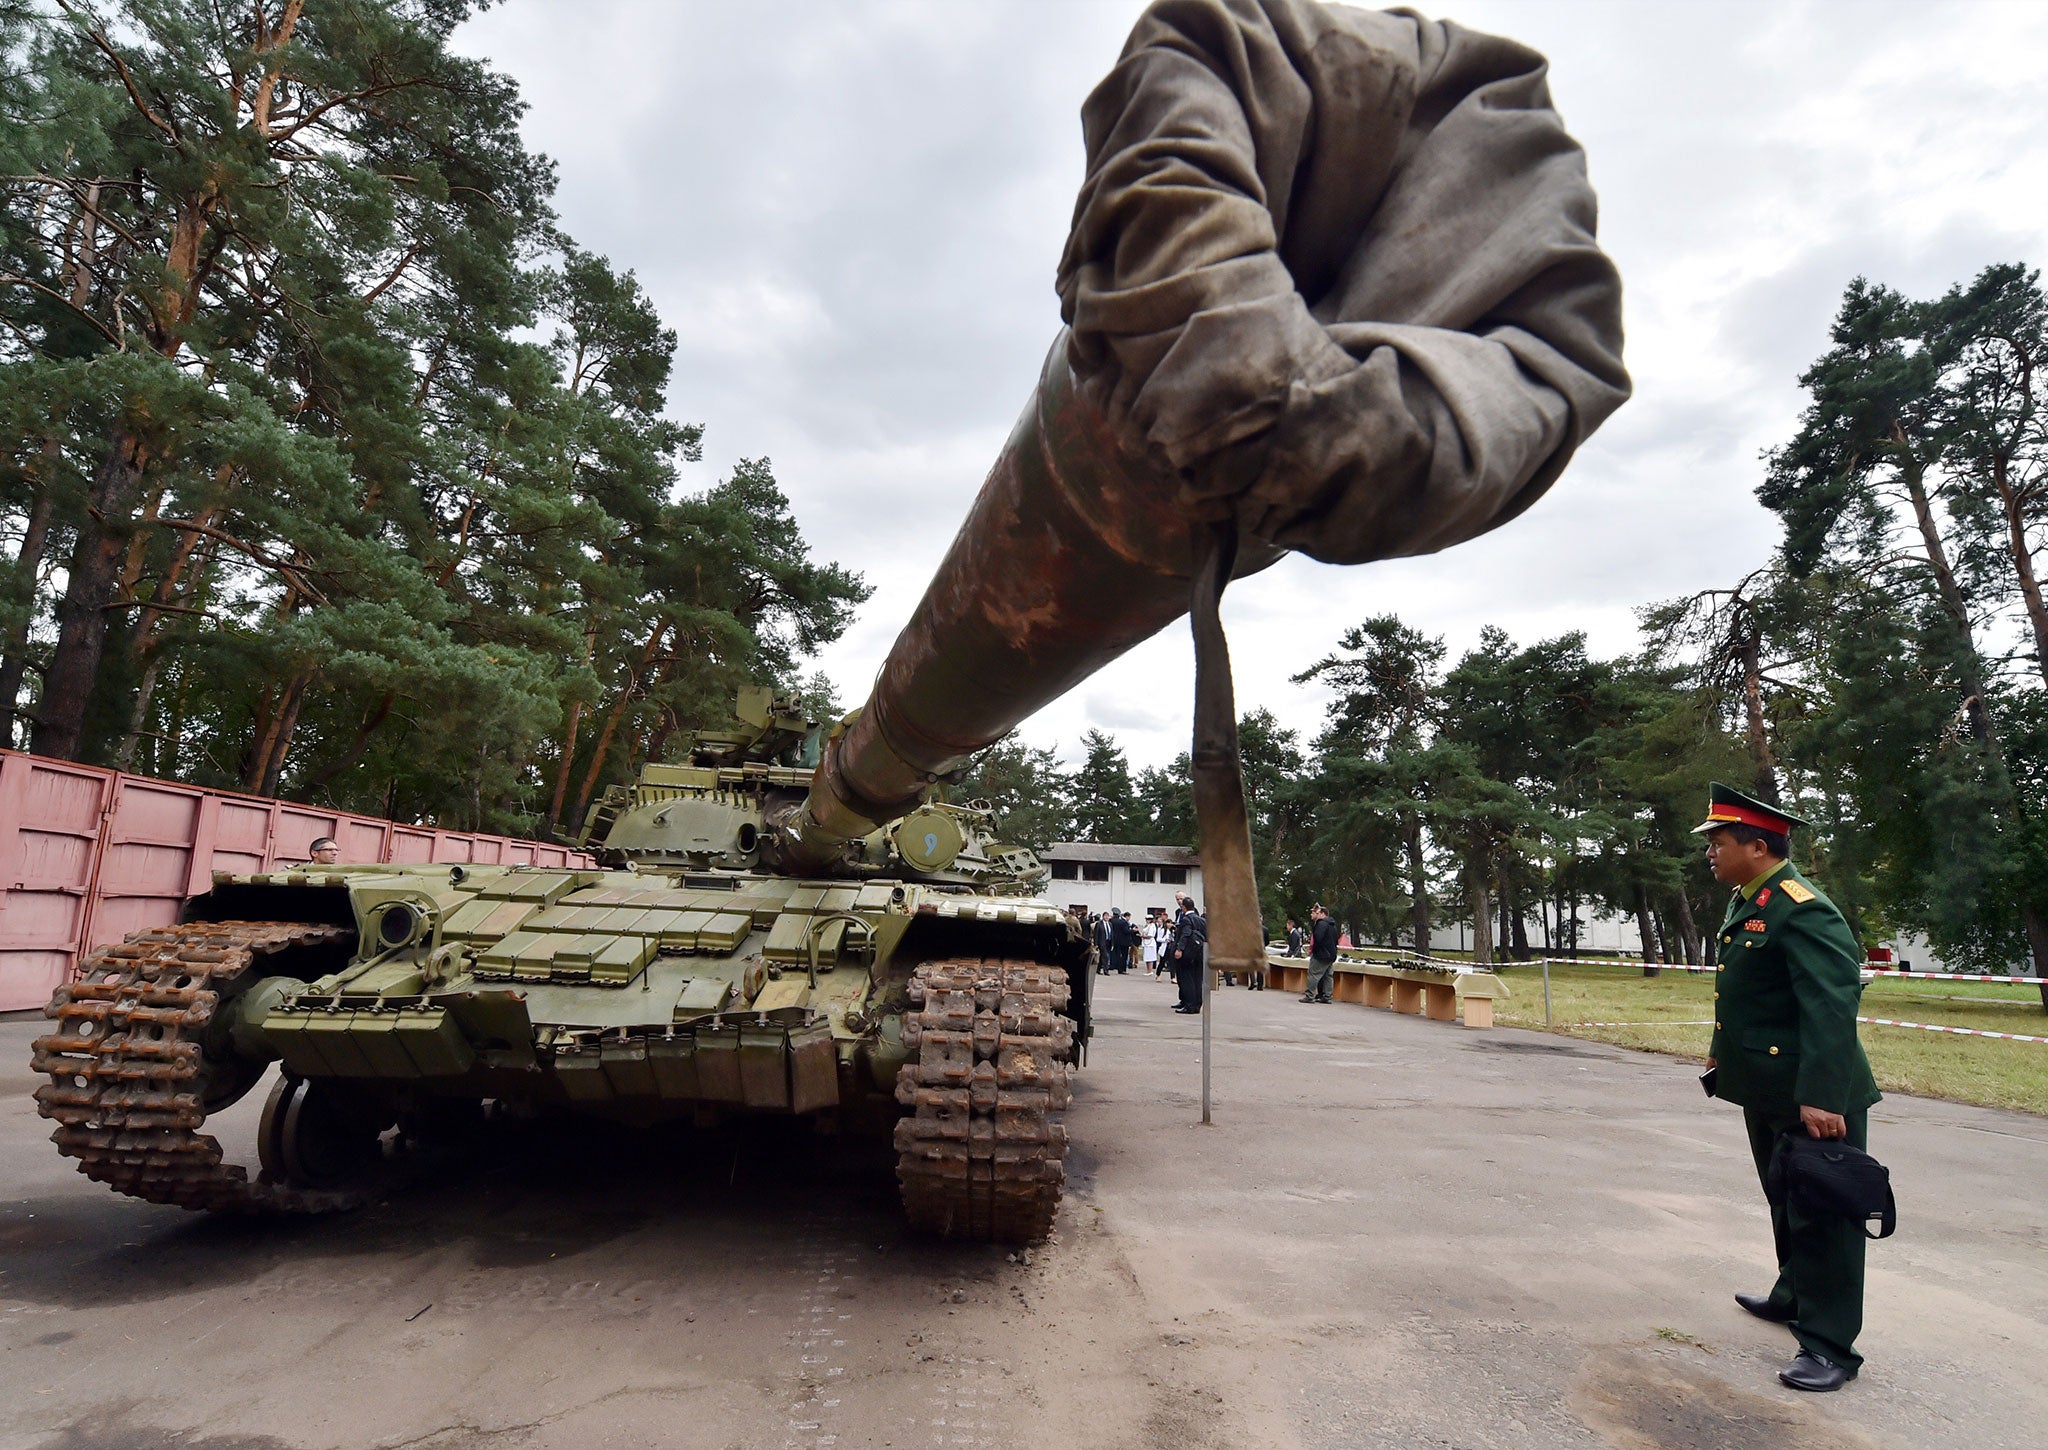 A military attache examines a Russian T-64BV tank displayed in Kiev on August 29, 2014. Russian weapons and artillery, seized by Ukrainian forces from pro-Russian separatists